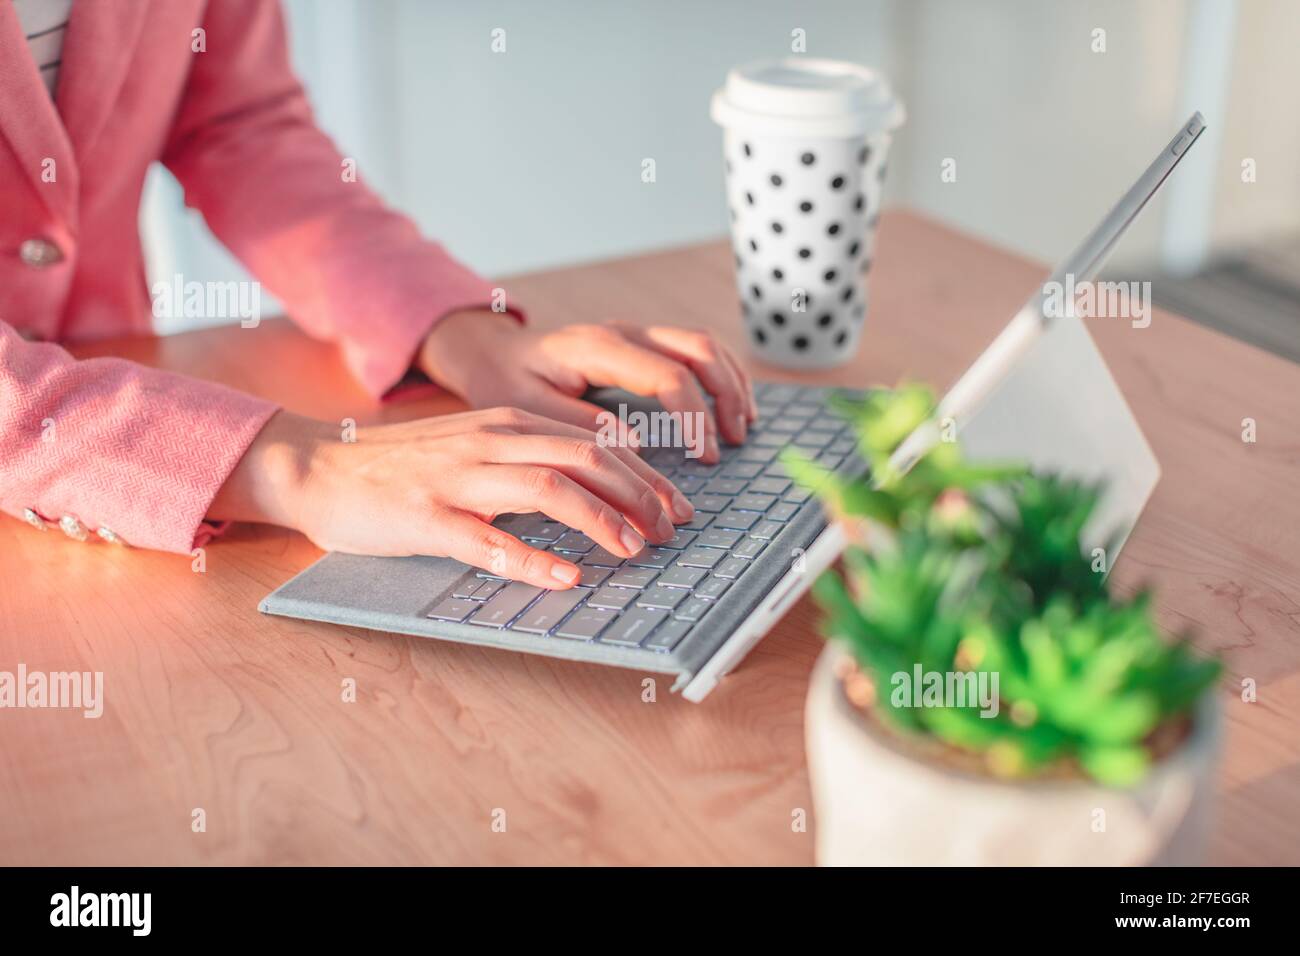 Working woman typing on laptop keyboard at home or office work desk. Closeup of hands with computer, coffee cup, tabletop succulent plant Stock Photo